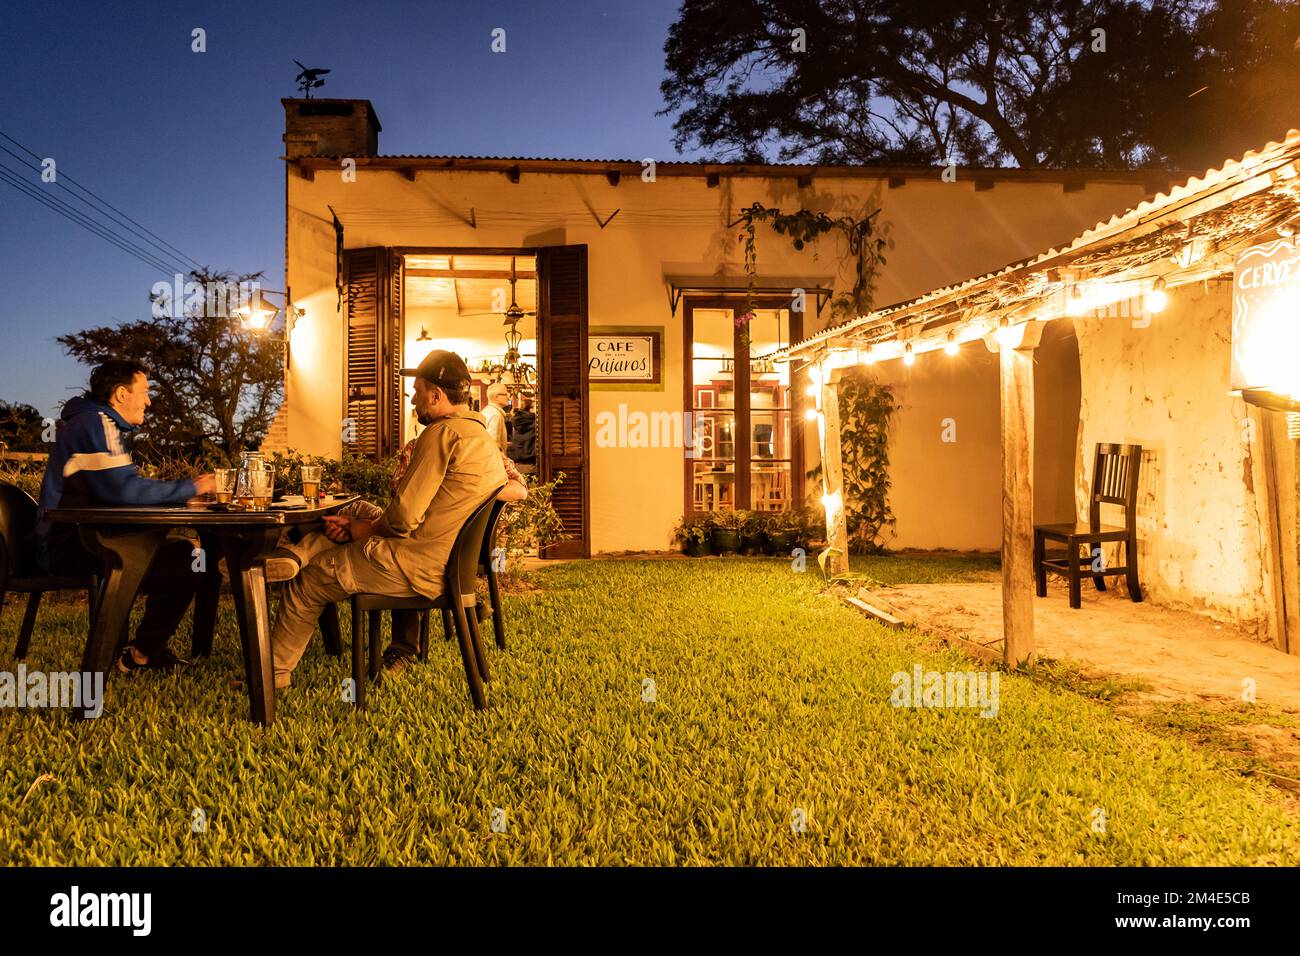 COLONIA CARLOS PELLEGRINI, CORRIENTES, ARGENTINA - NOVEMBER 20, 2021: A group of people enjoy a beer in the garden of a rustic small pub next to Cafe Stock Photo